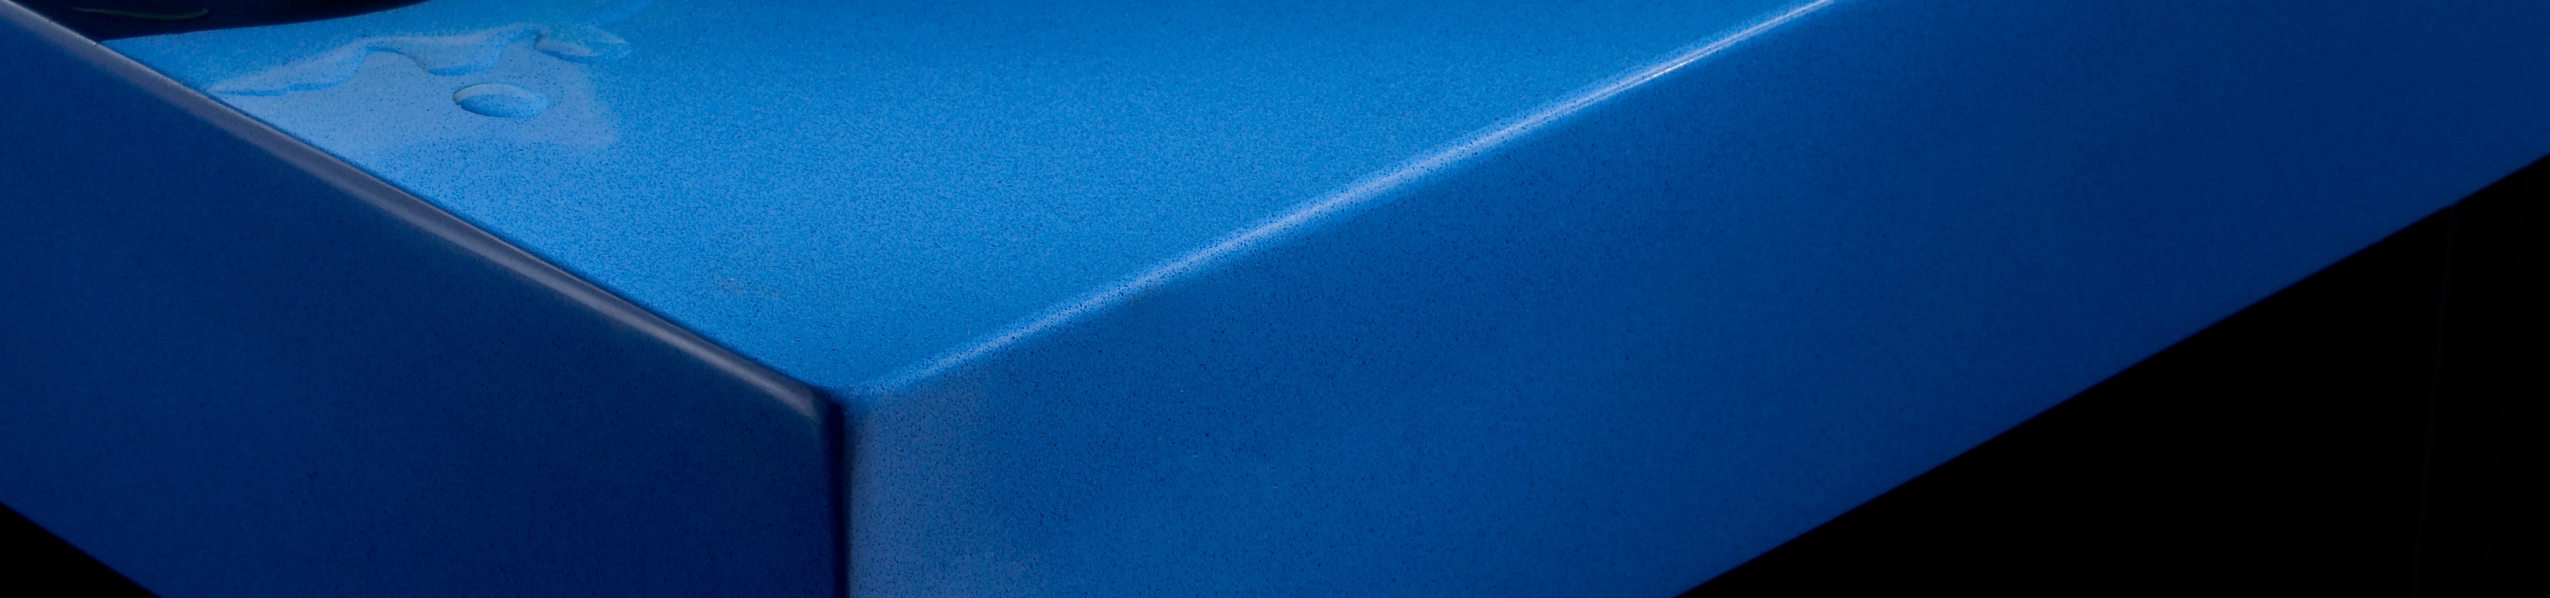 Image 56 of RS1971 Azul Enjoy 2 Blue Enjoy usa Detail 1 1 in What is Silestone - Cosentino